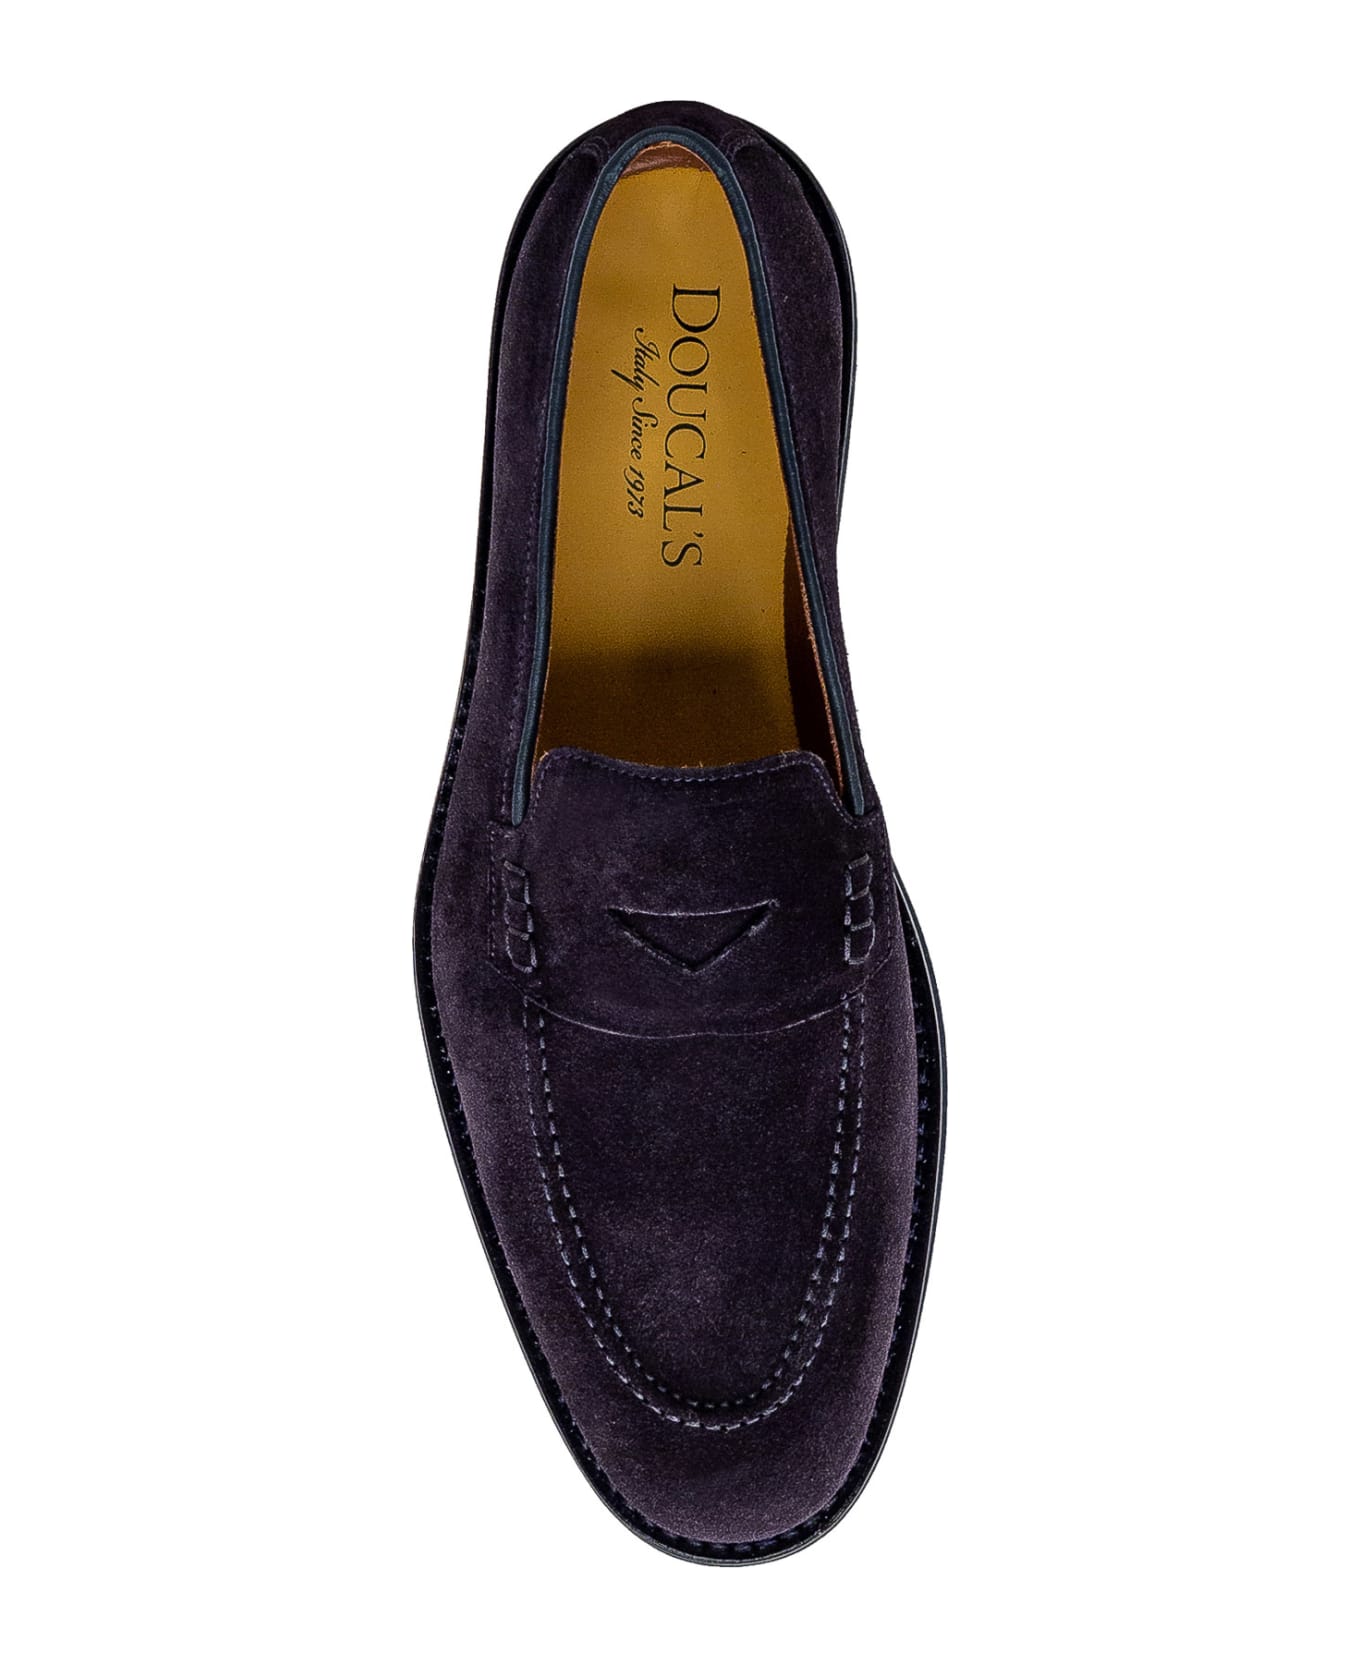 Doucal's Leather Loafer - BLU FDO BLU